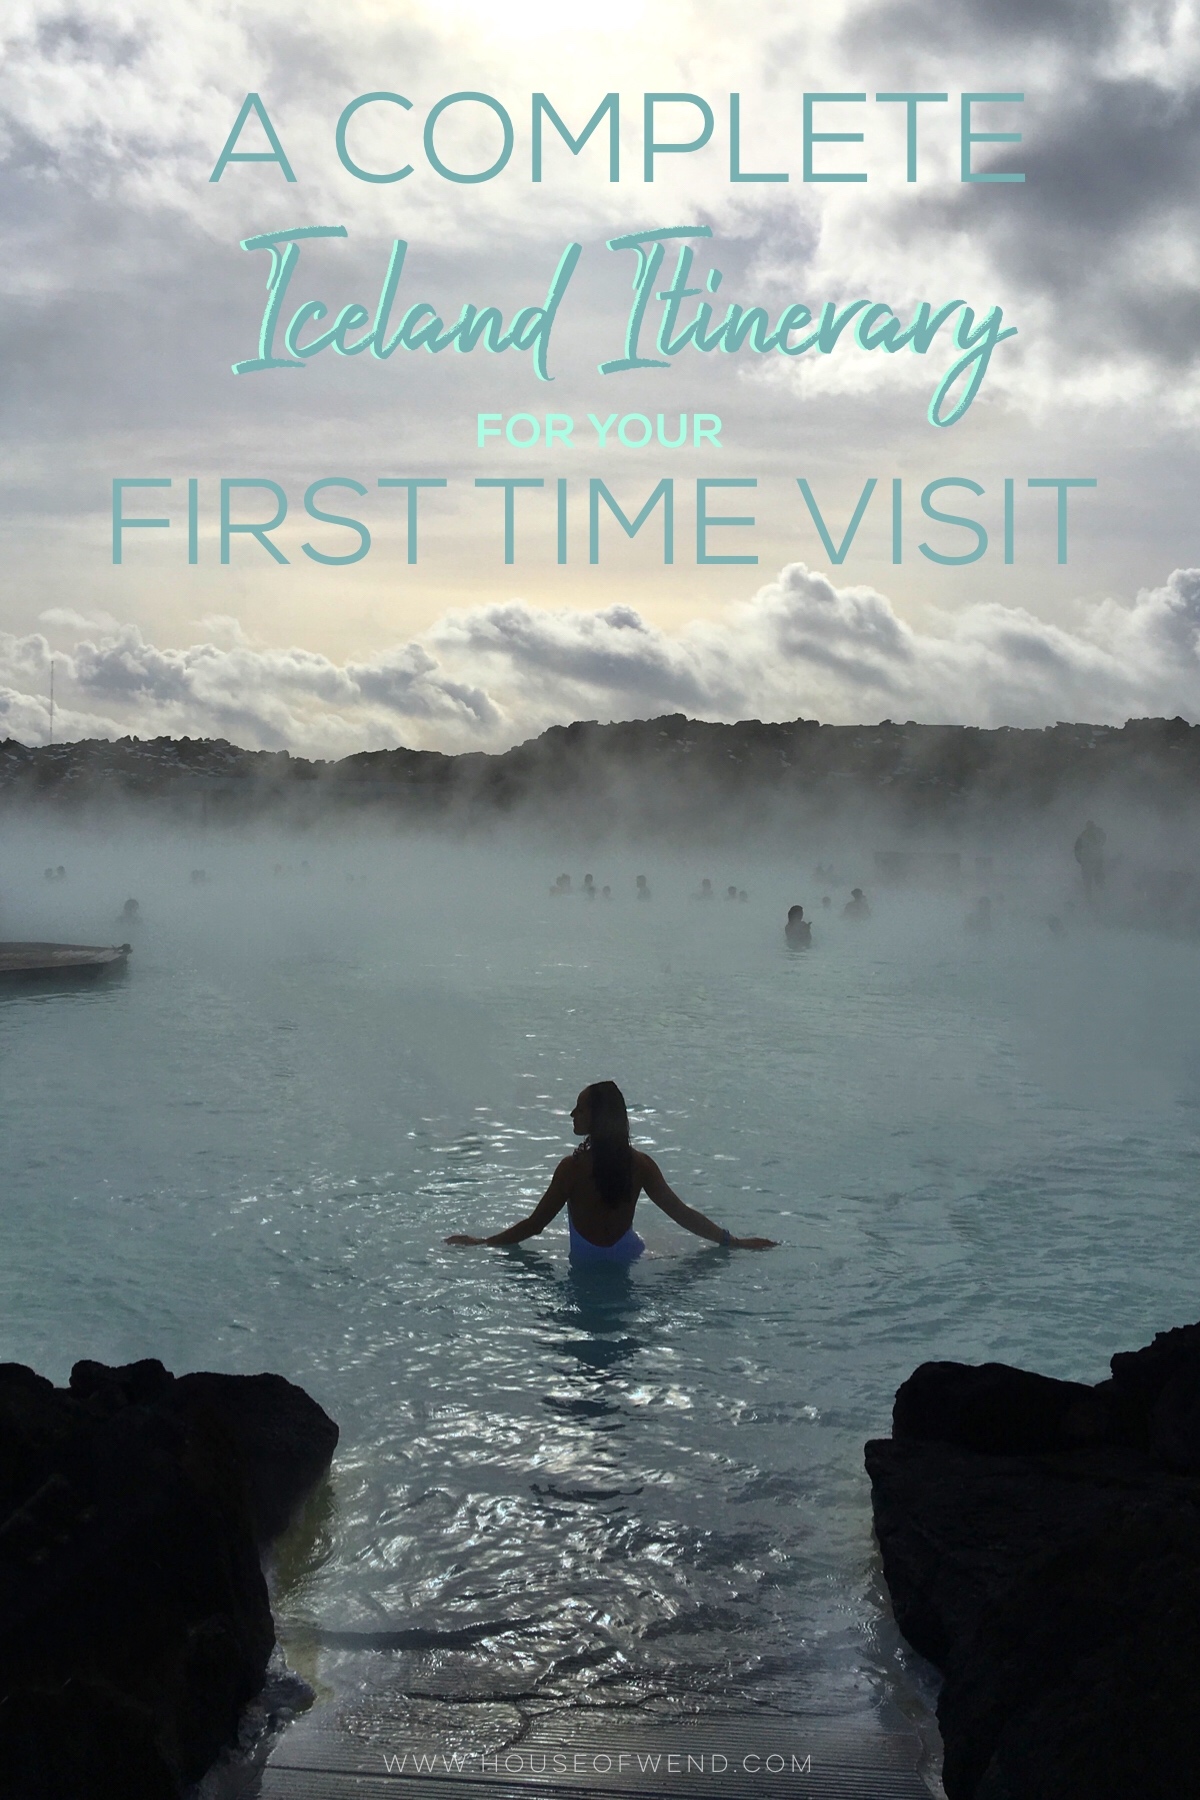 A complete Iceland Itinerary